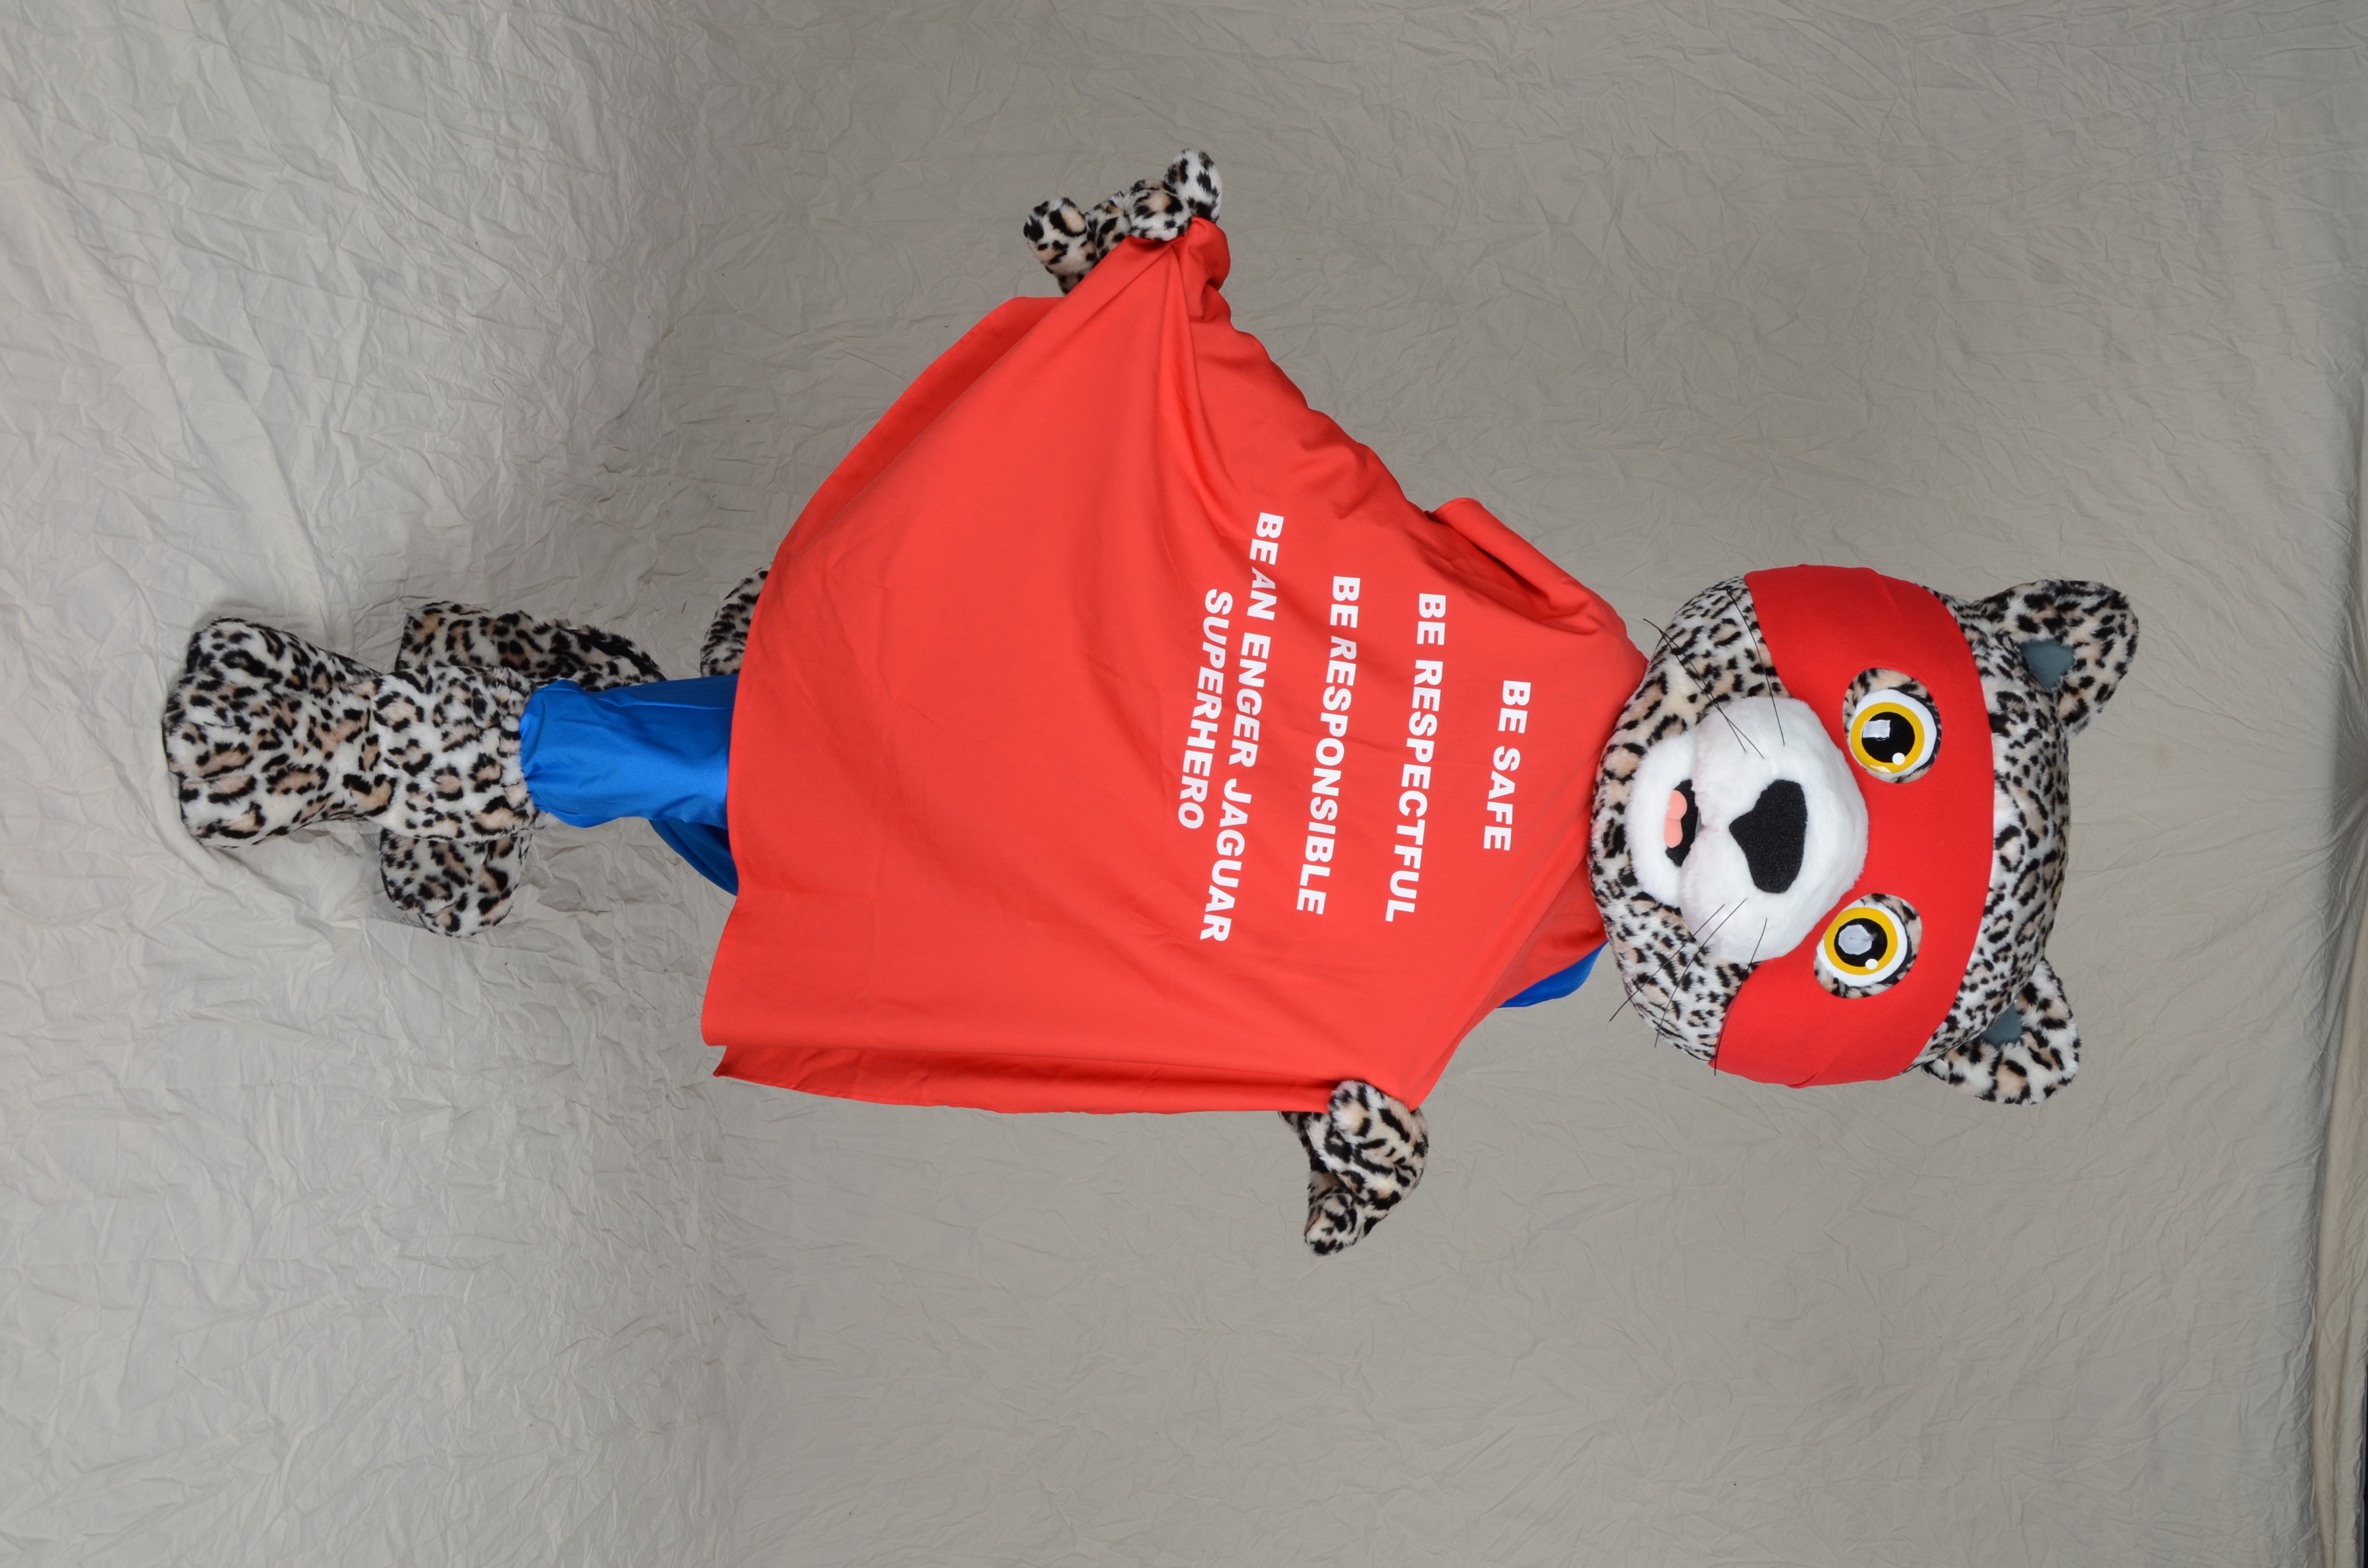 jaguar mascot with be safe, be respectful, be responsible written on his cape